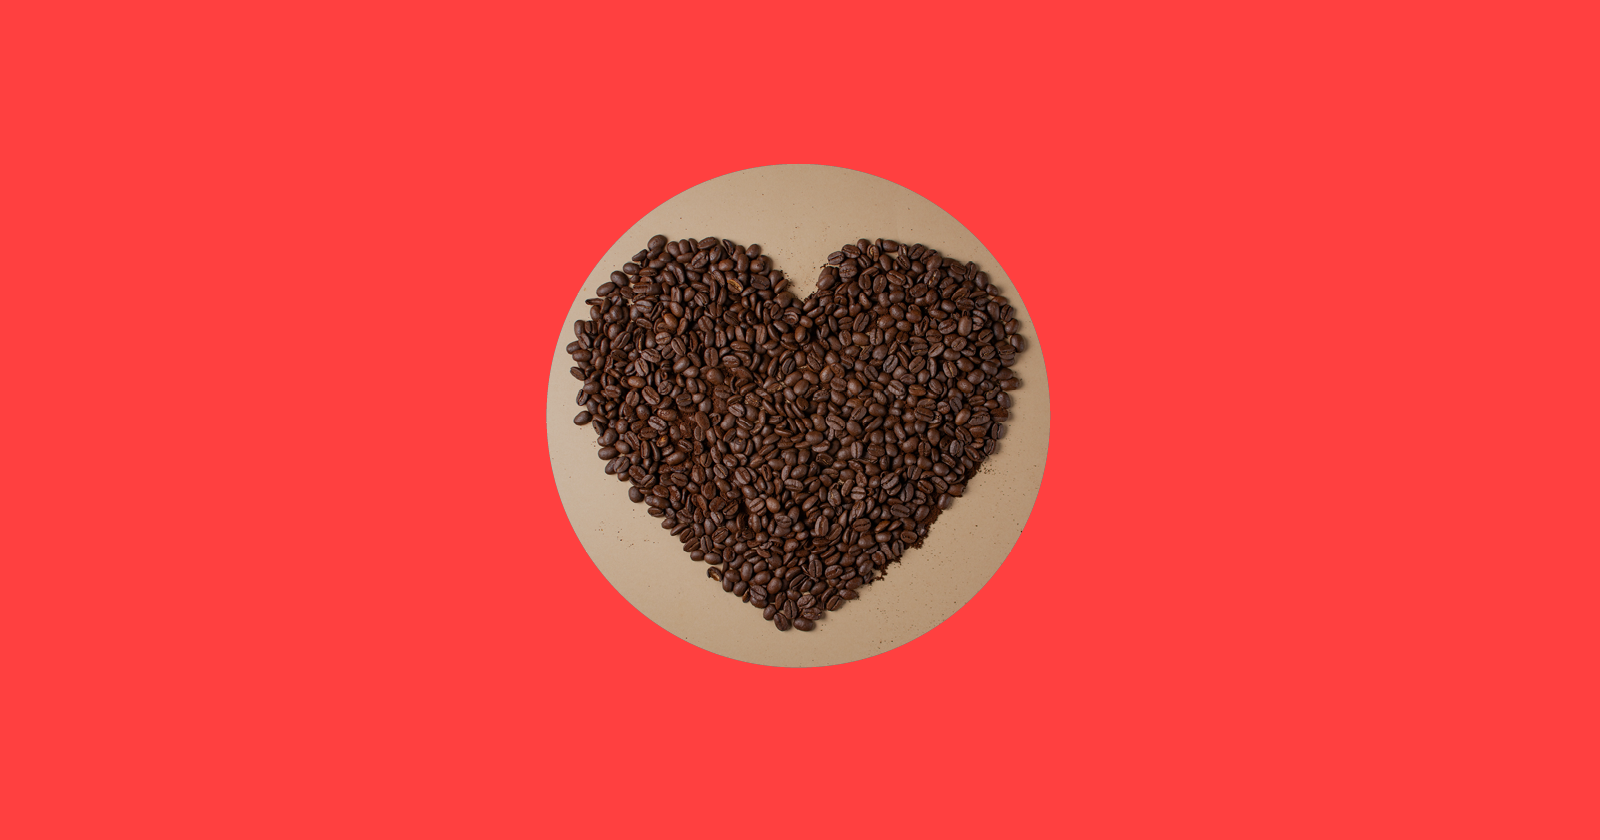 a heart made out of coffee beans on a plate